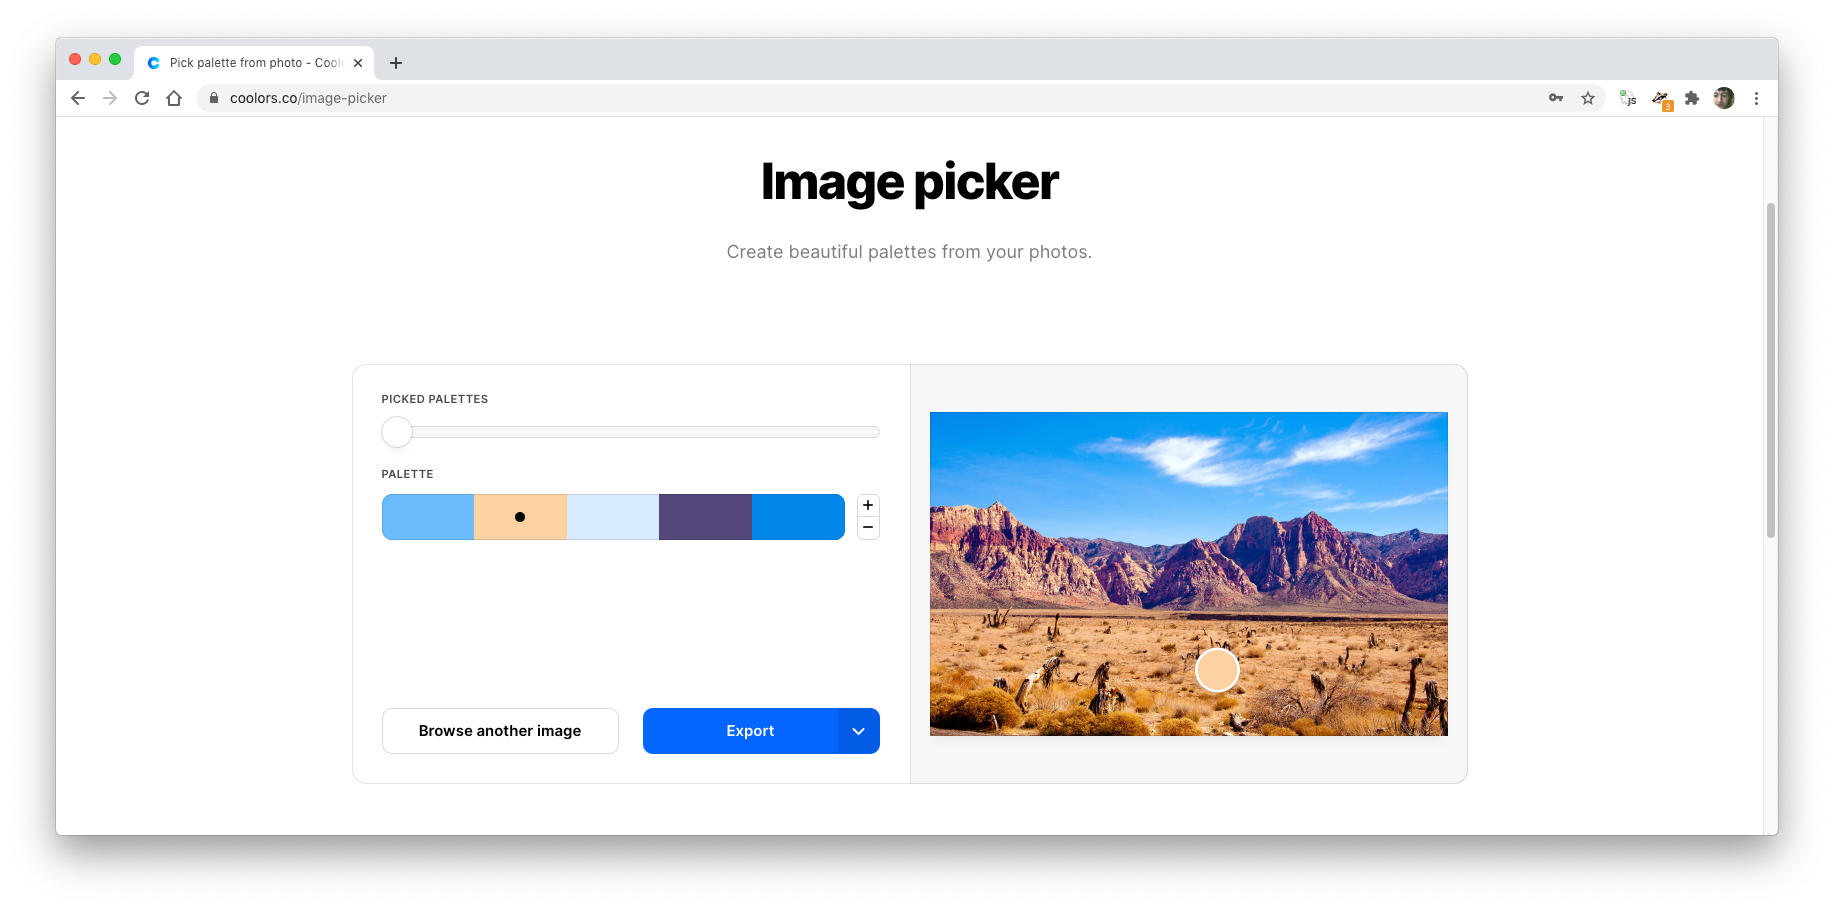 A screenshot of the image picker from Coolors.co